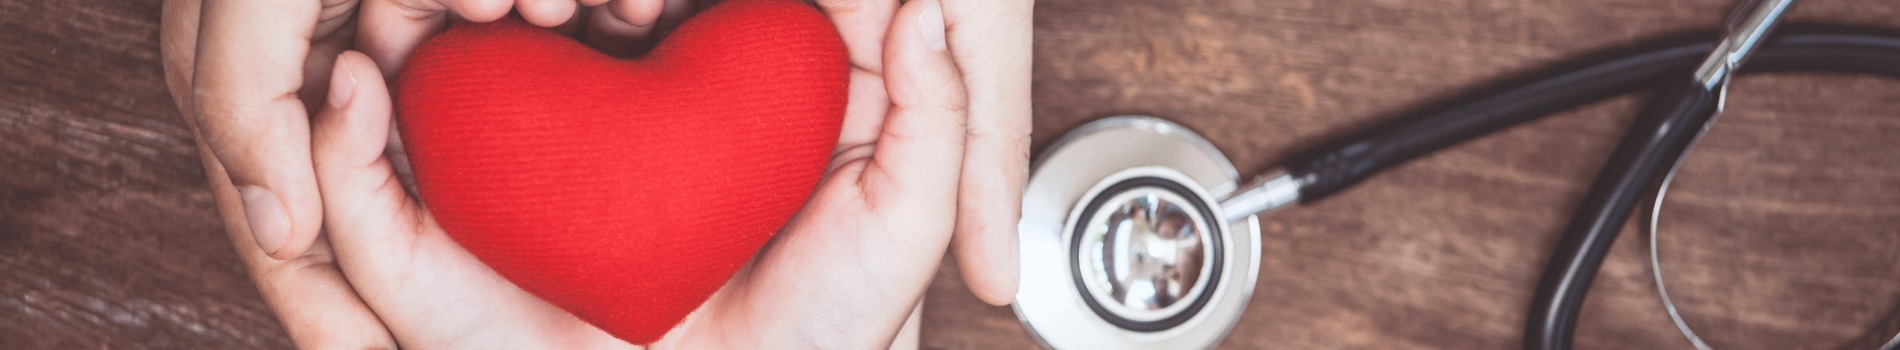 Red heart held in hands of woman and child with doctors stethoscope.